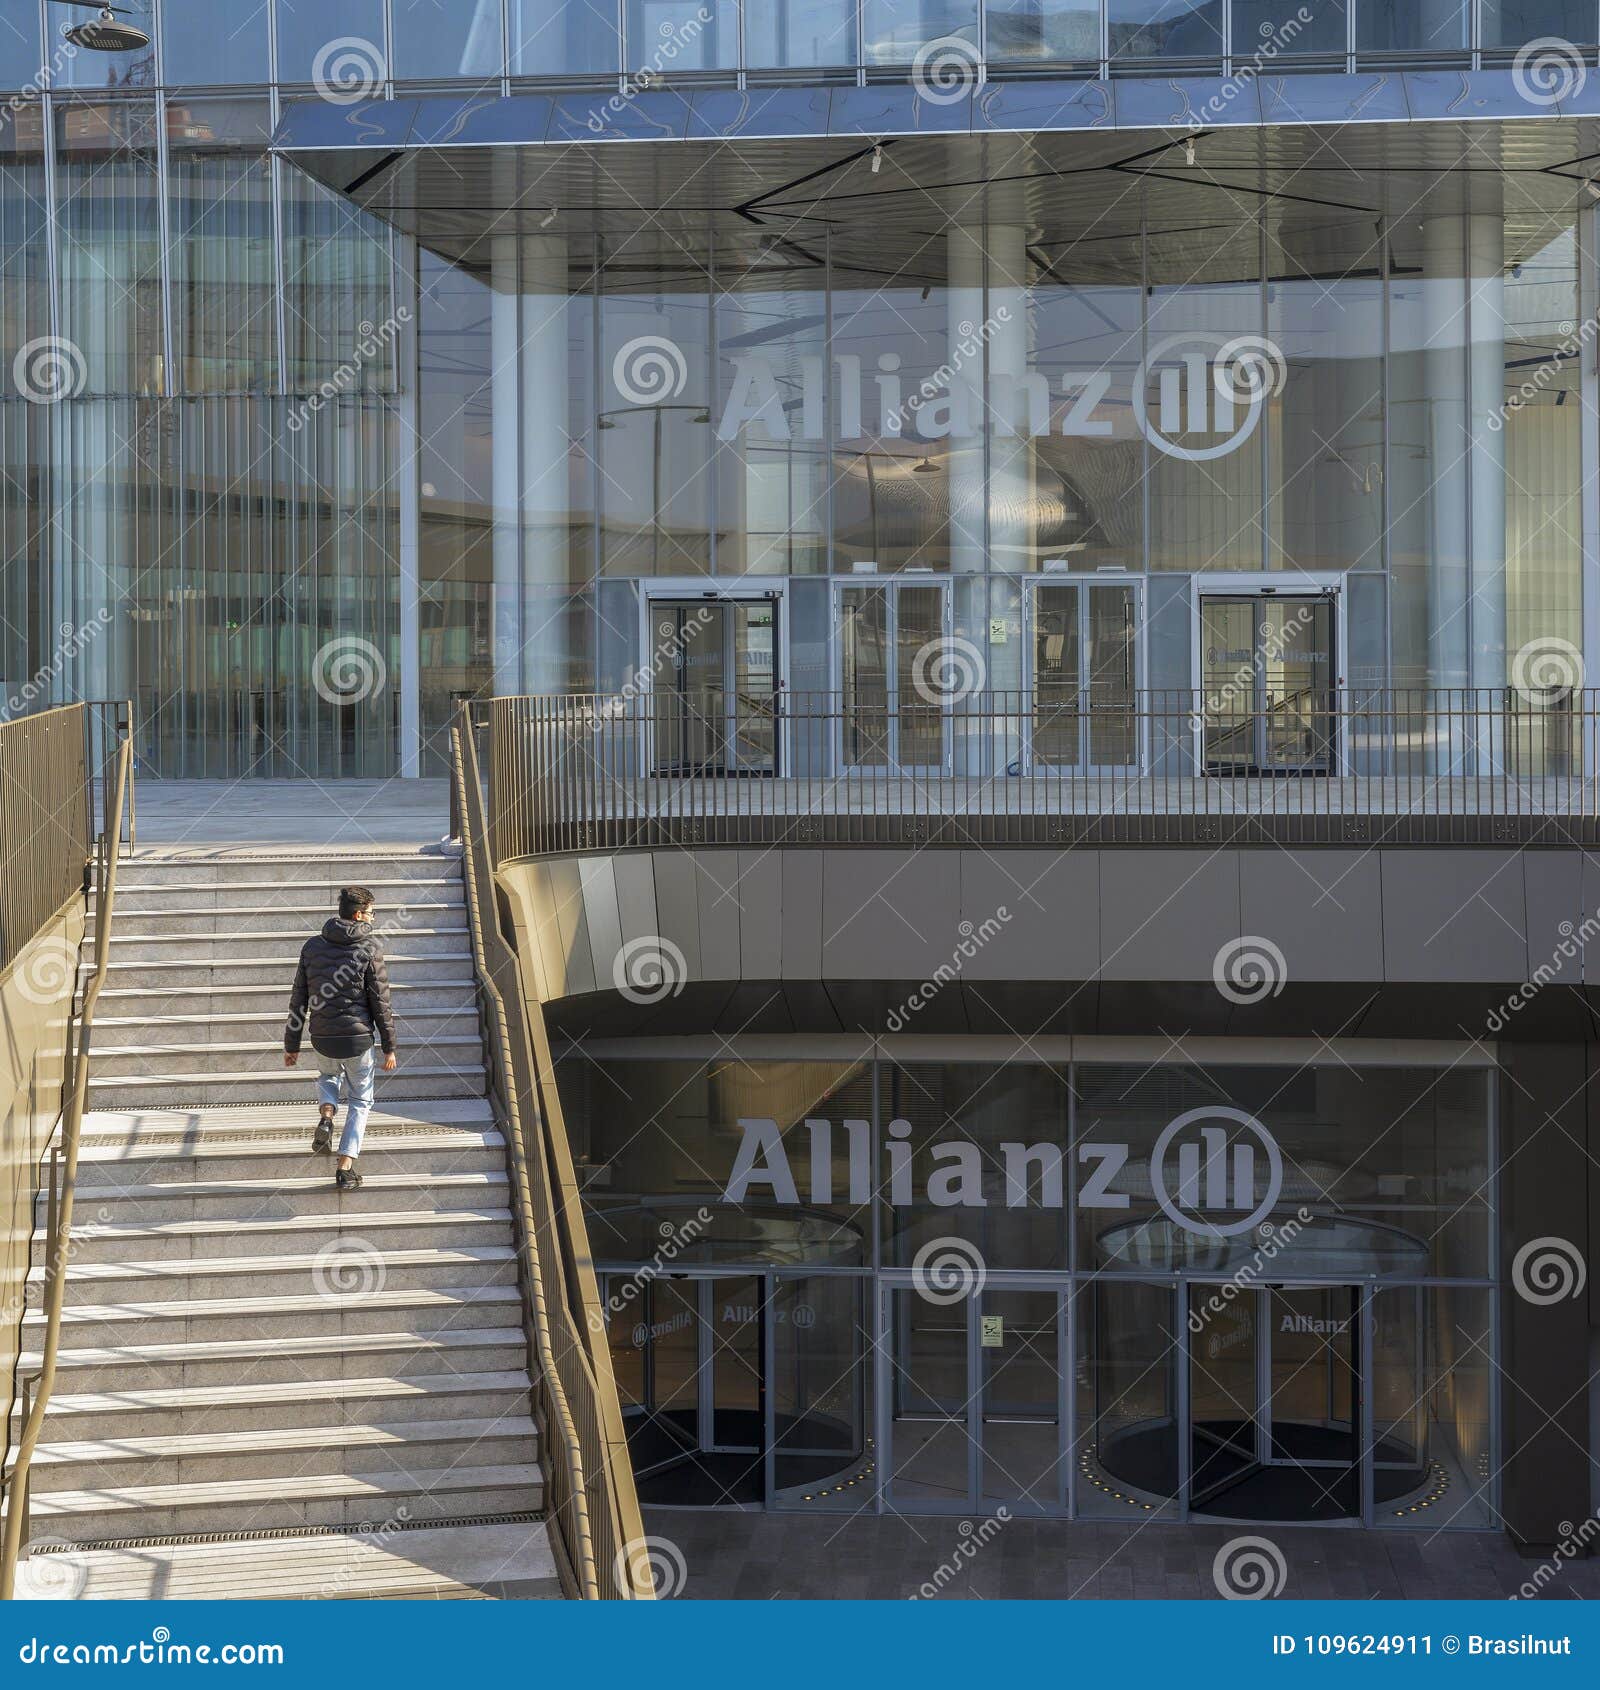 Entrance To The Allianz Tower A 50 Floor 209 Metre Tall